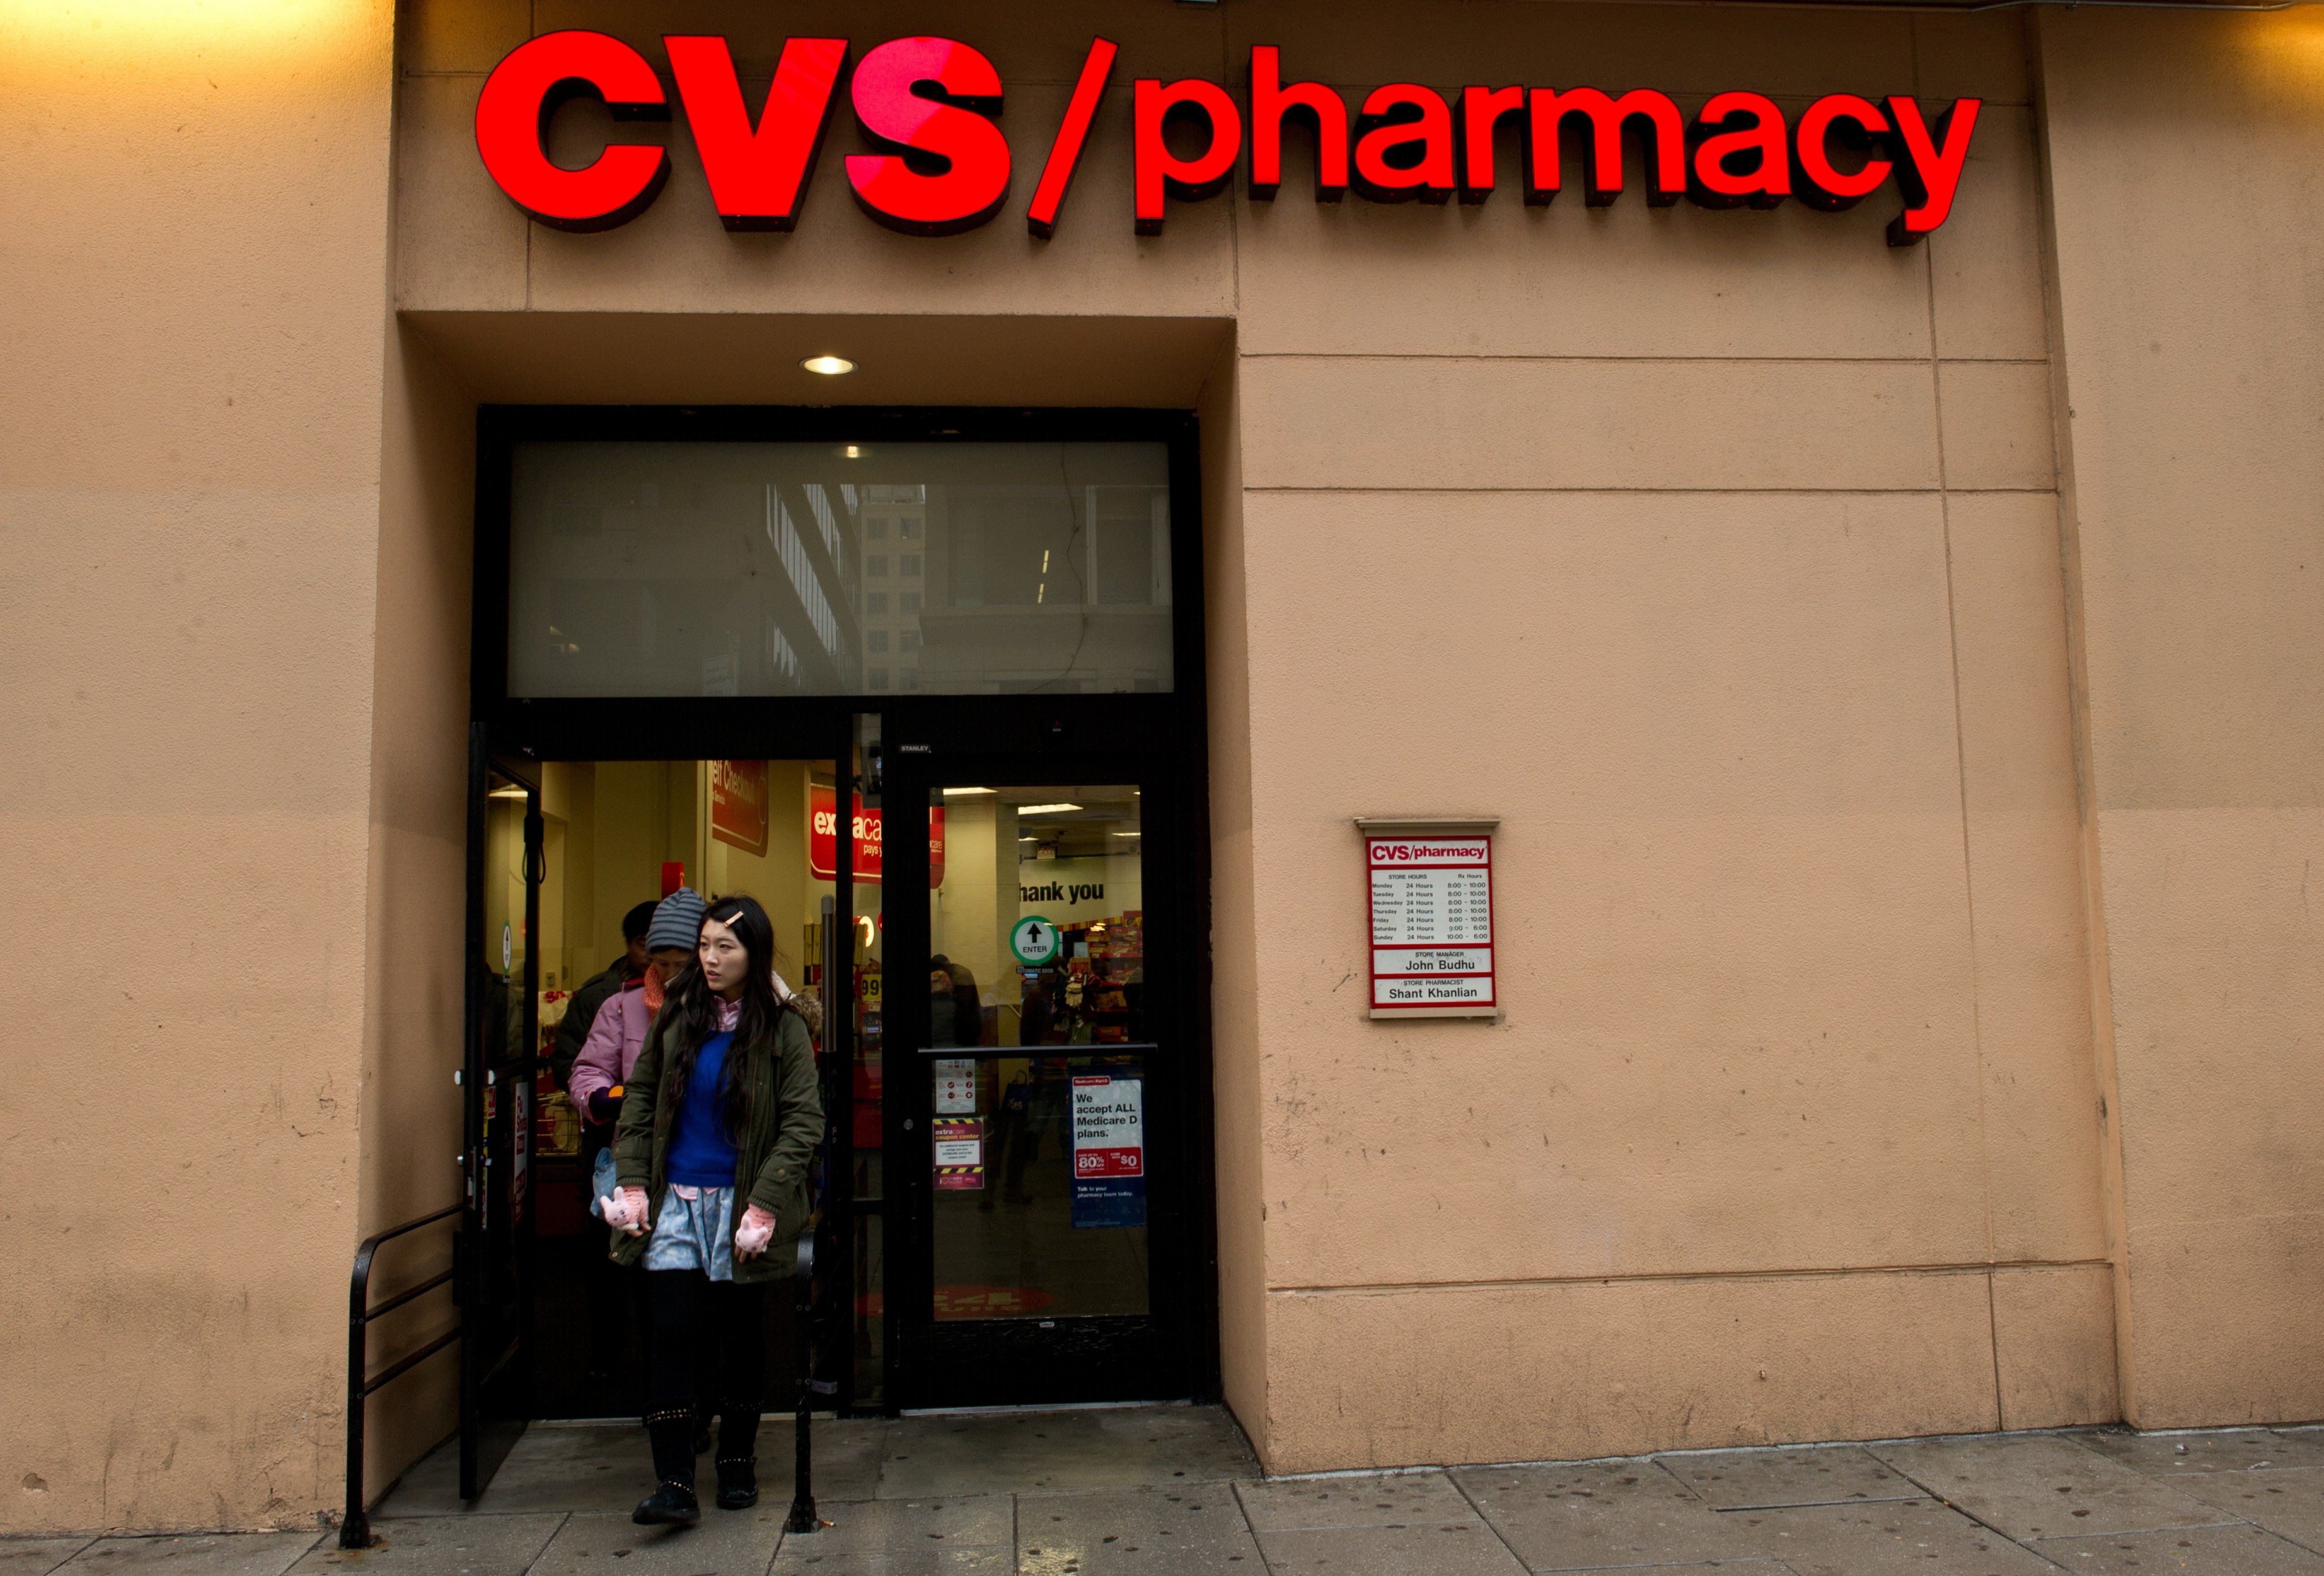 Patrons leave a CVS drugstore February 5, 2014 in Washington, DC. The second largest US drugstore chain, CVS, announced Wednesday it will stop selling cigarettes by the end of the year (Karen Bleier—AFP/Getty Images)